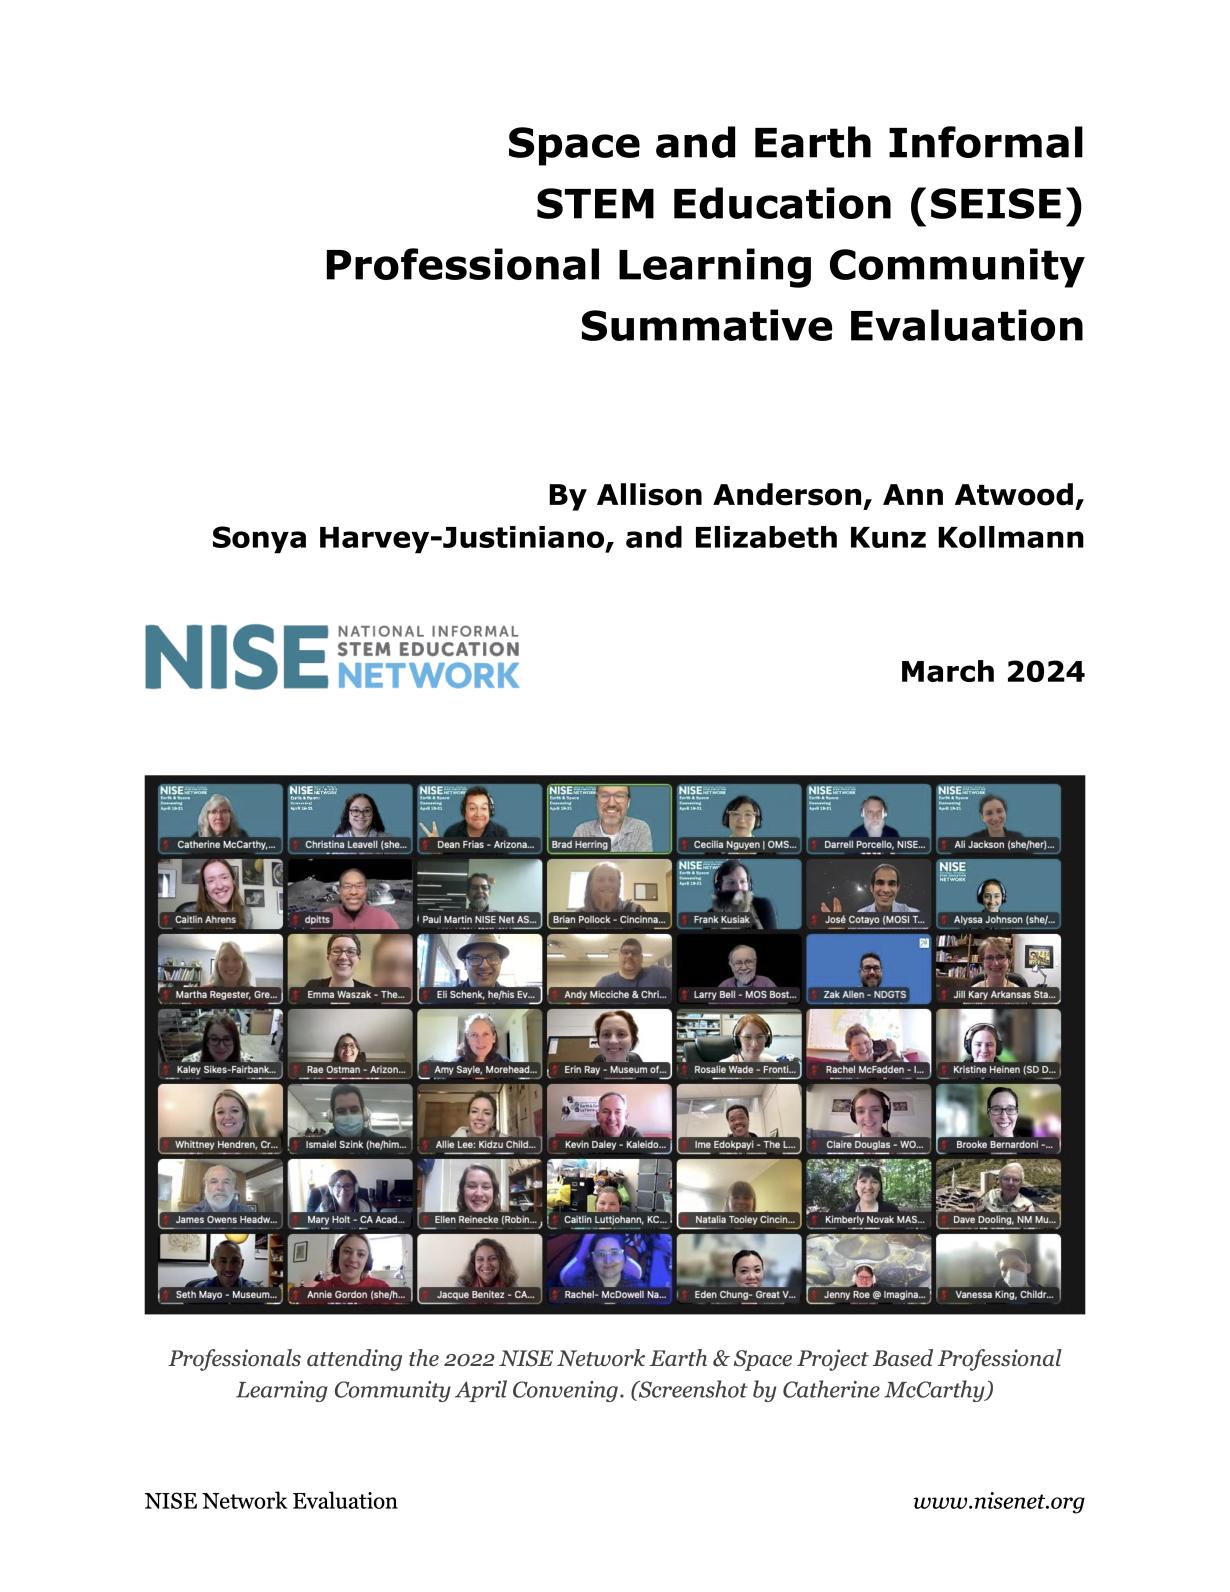 SEISE Project Professional Learning Community PLC Summative Evaluation revised March 2024 report cover page showing many faces on Zoom